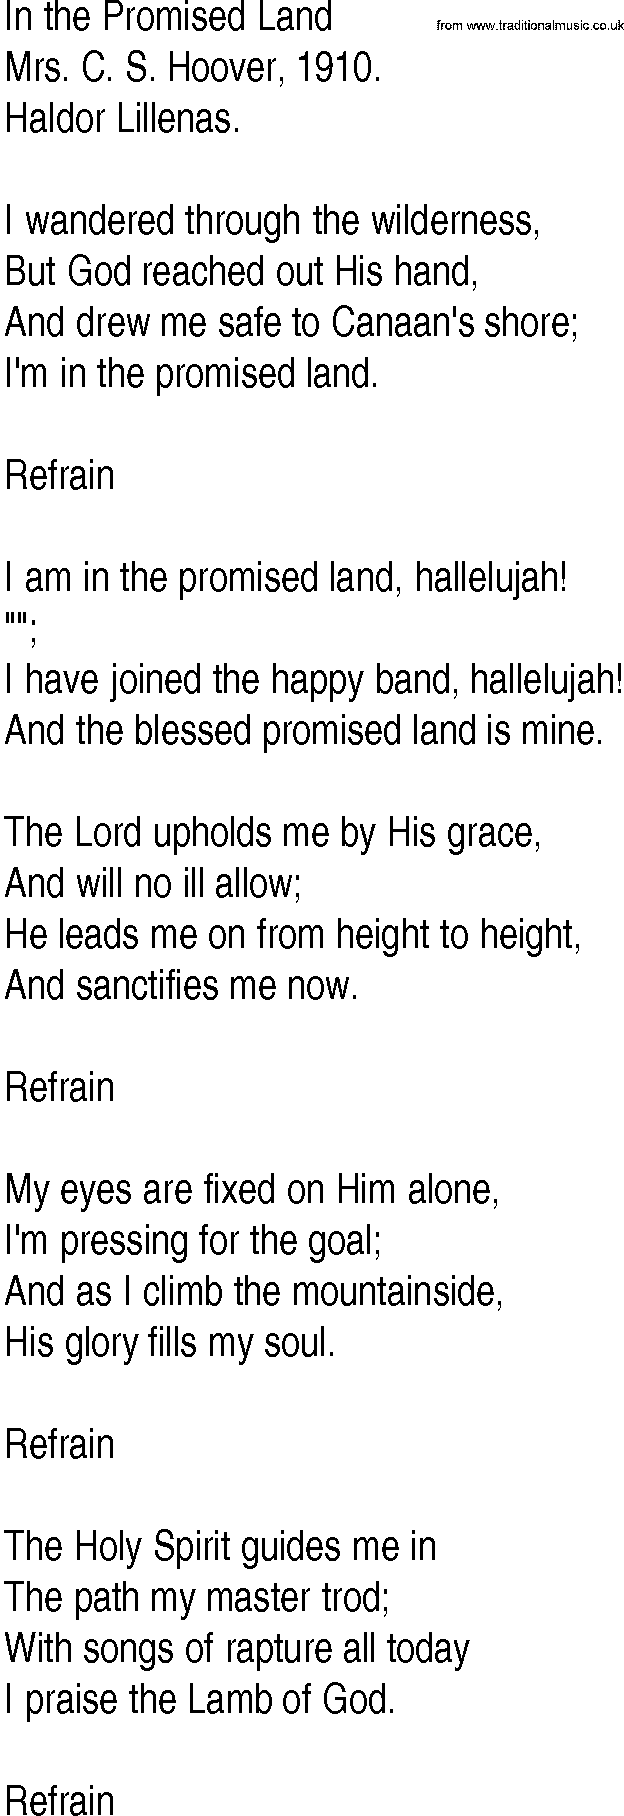 Hymn and Gospel Song: In the Promised Land by Mrs C S Hoover lyrics